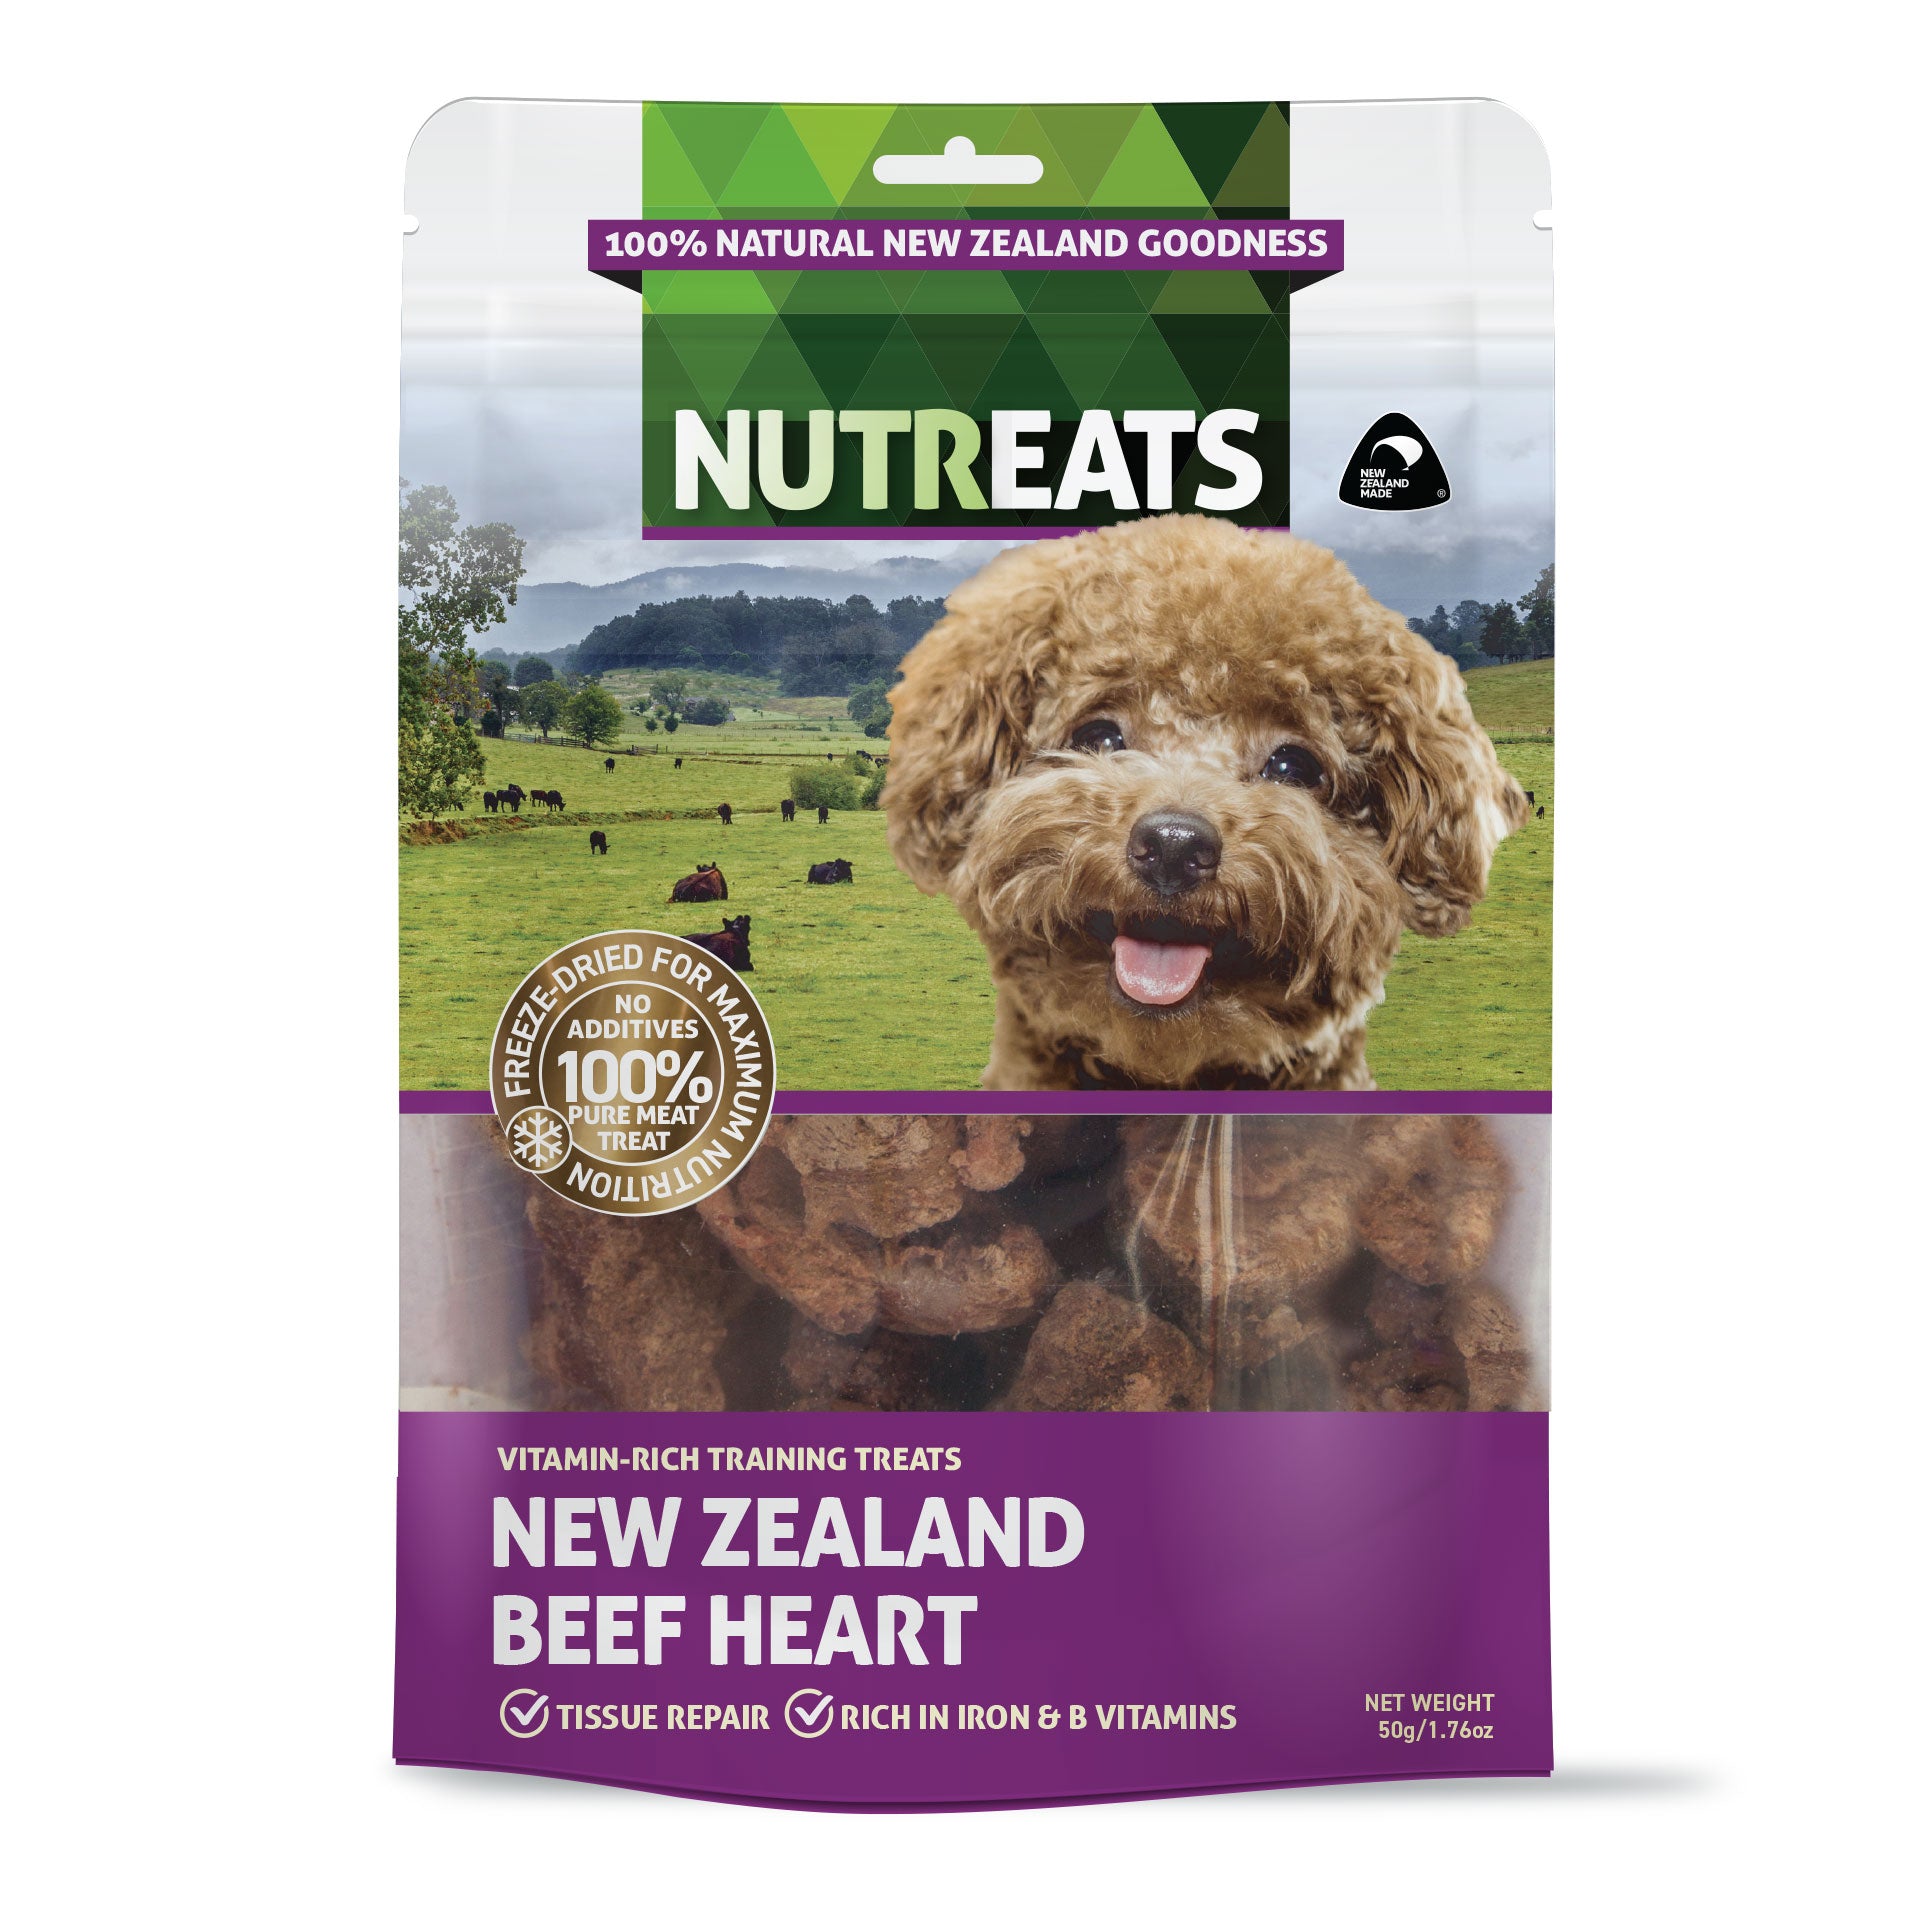 Nutreats Beef heart treats for dogs. 100% natural freeze dried beef heart muscle, rich in iron and b vitamins aiding dogs tissue repair. 